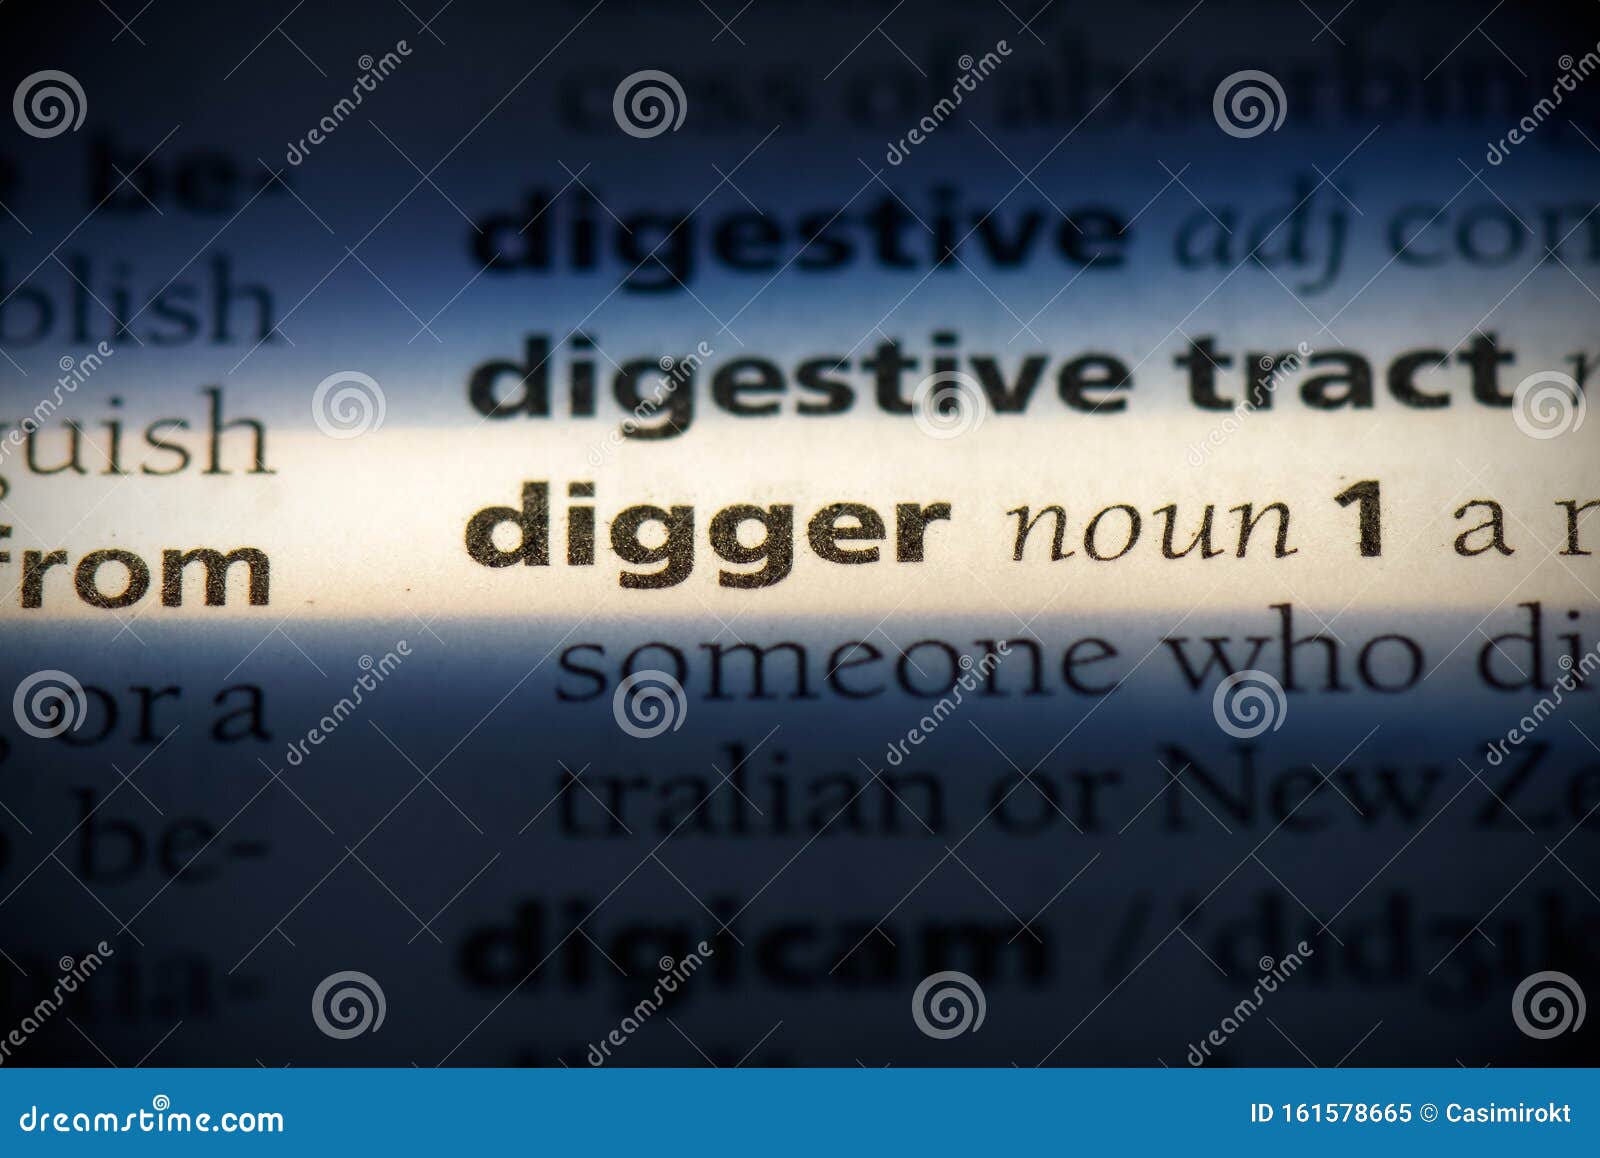 Gold digger - definition of gold digger by The Free Dictionary